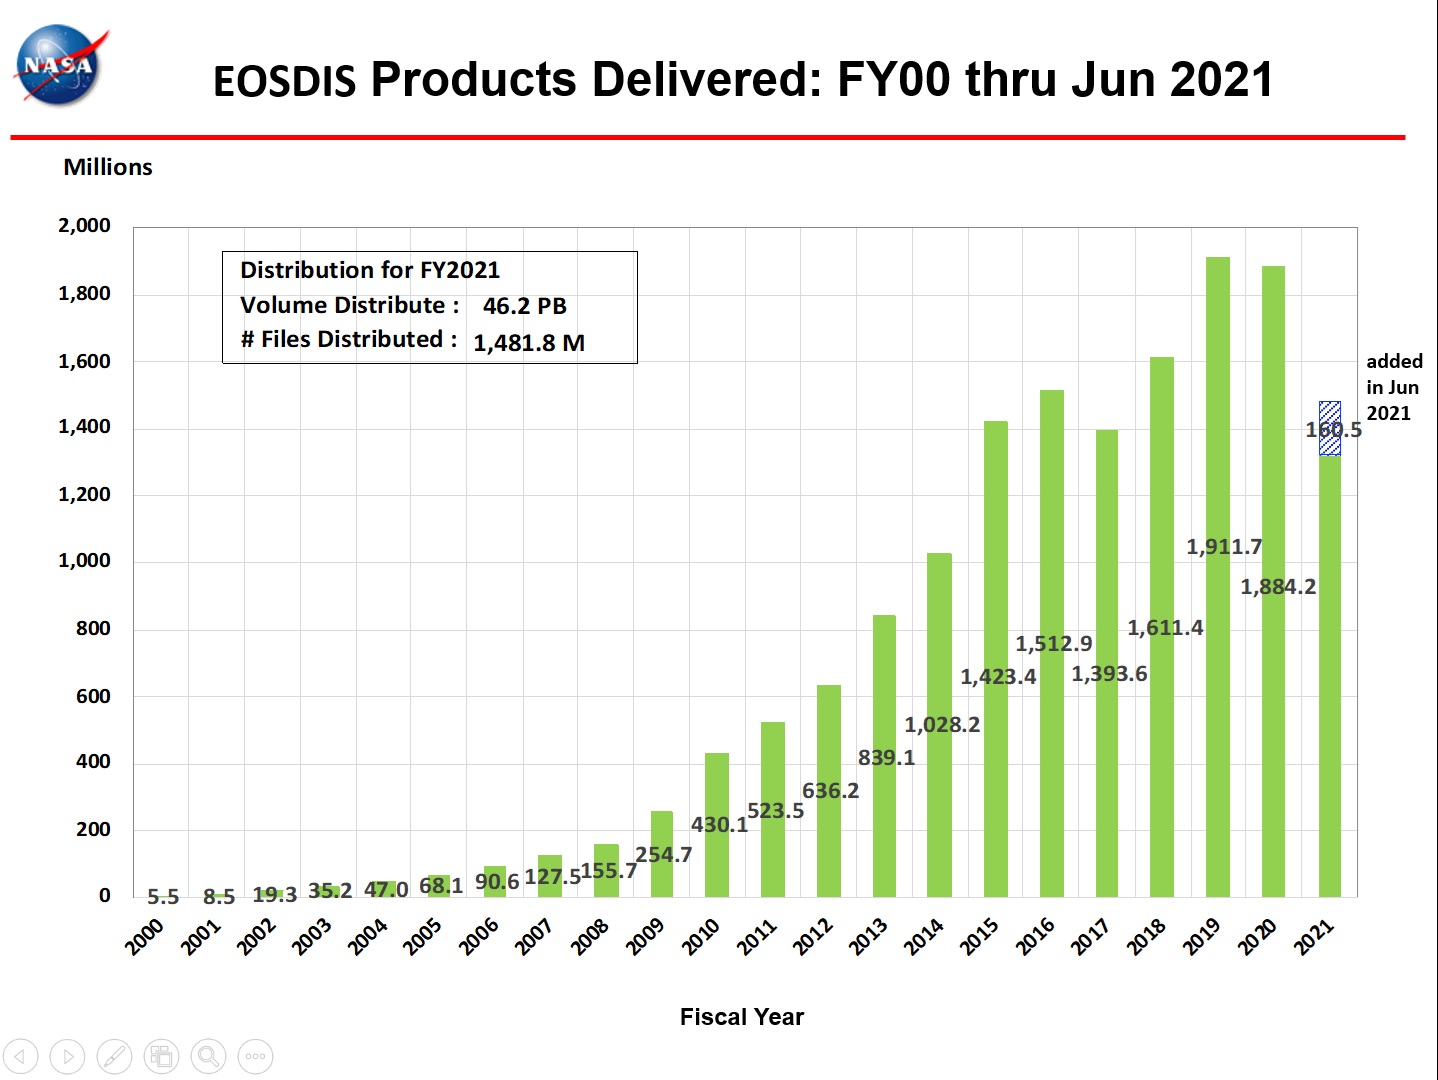 EOSDIS Products Delivered 1-2021